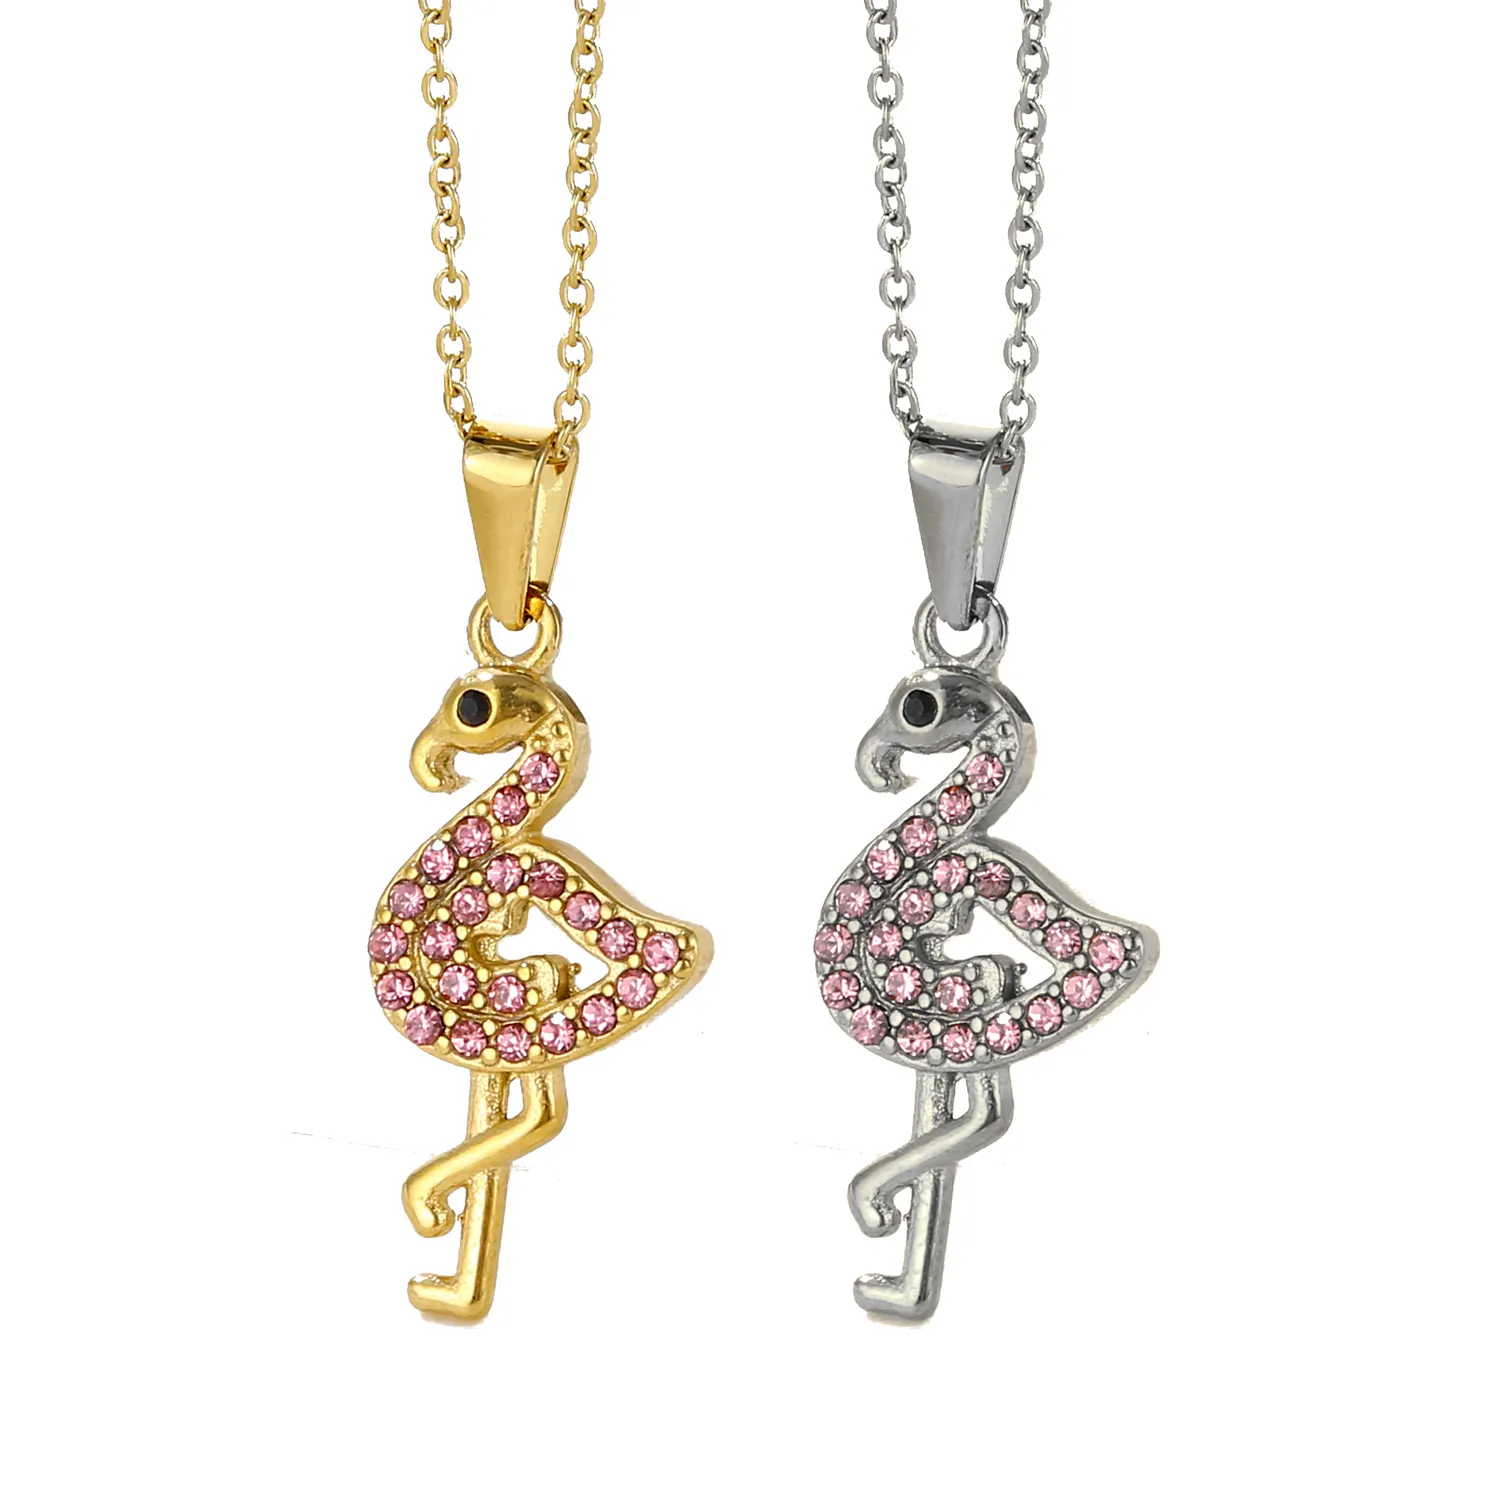 Ins Style Pink Crystal Flamingo Pendant Necklaces Stainless Steel 18k Gold Plated Rhinestone Bird Necklace Gifts For Women Girl